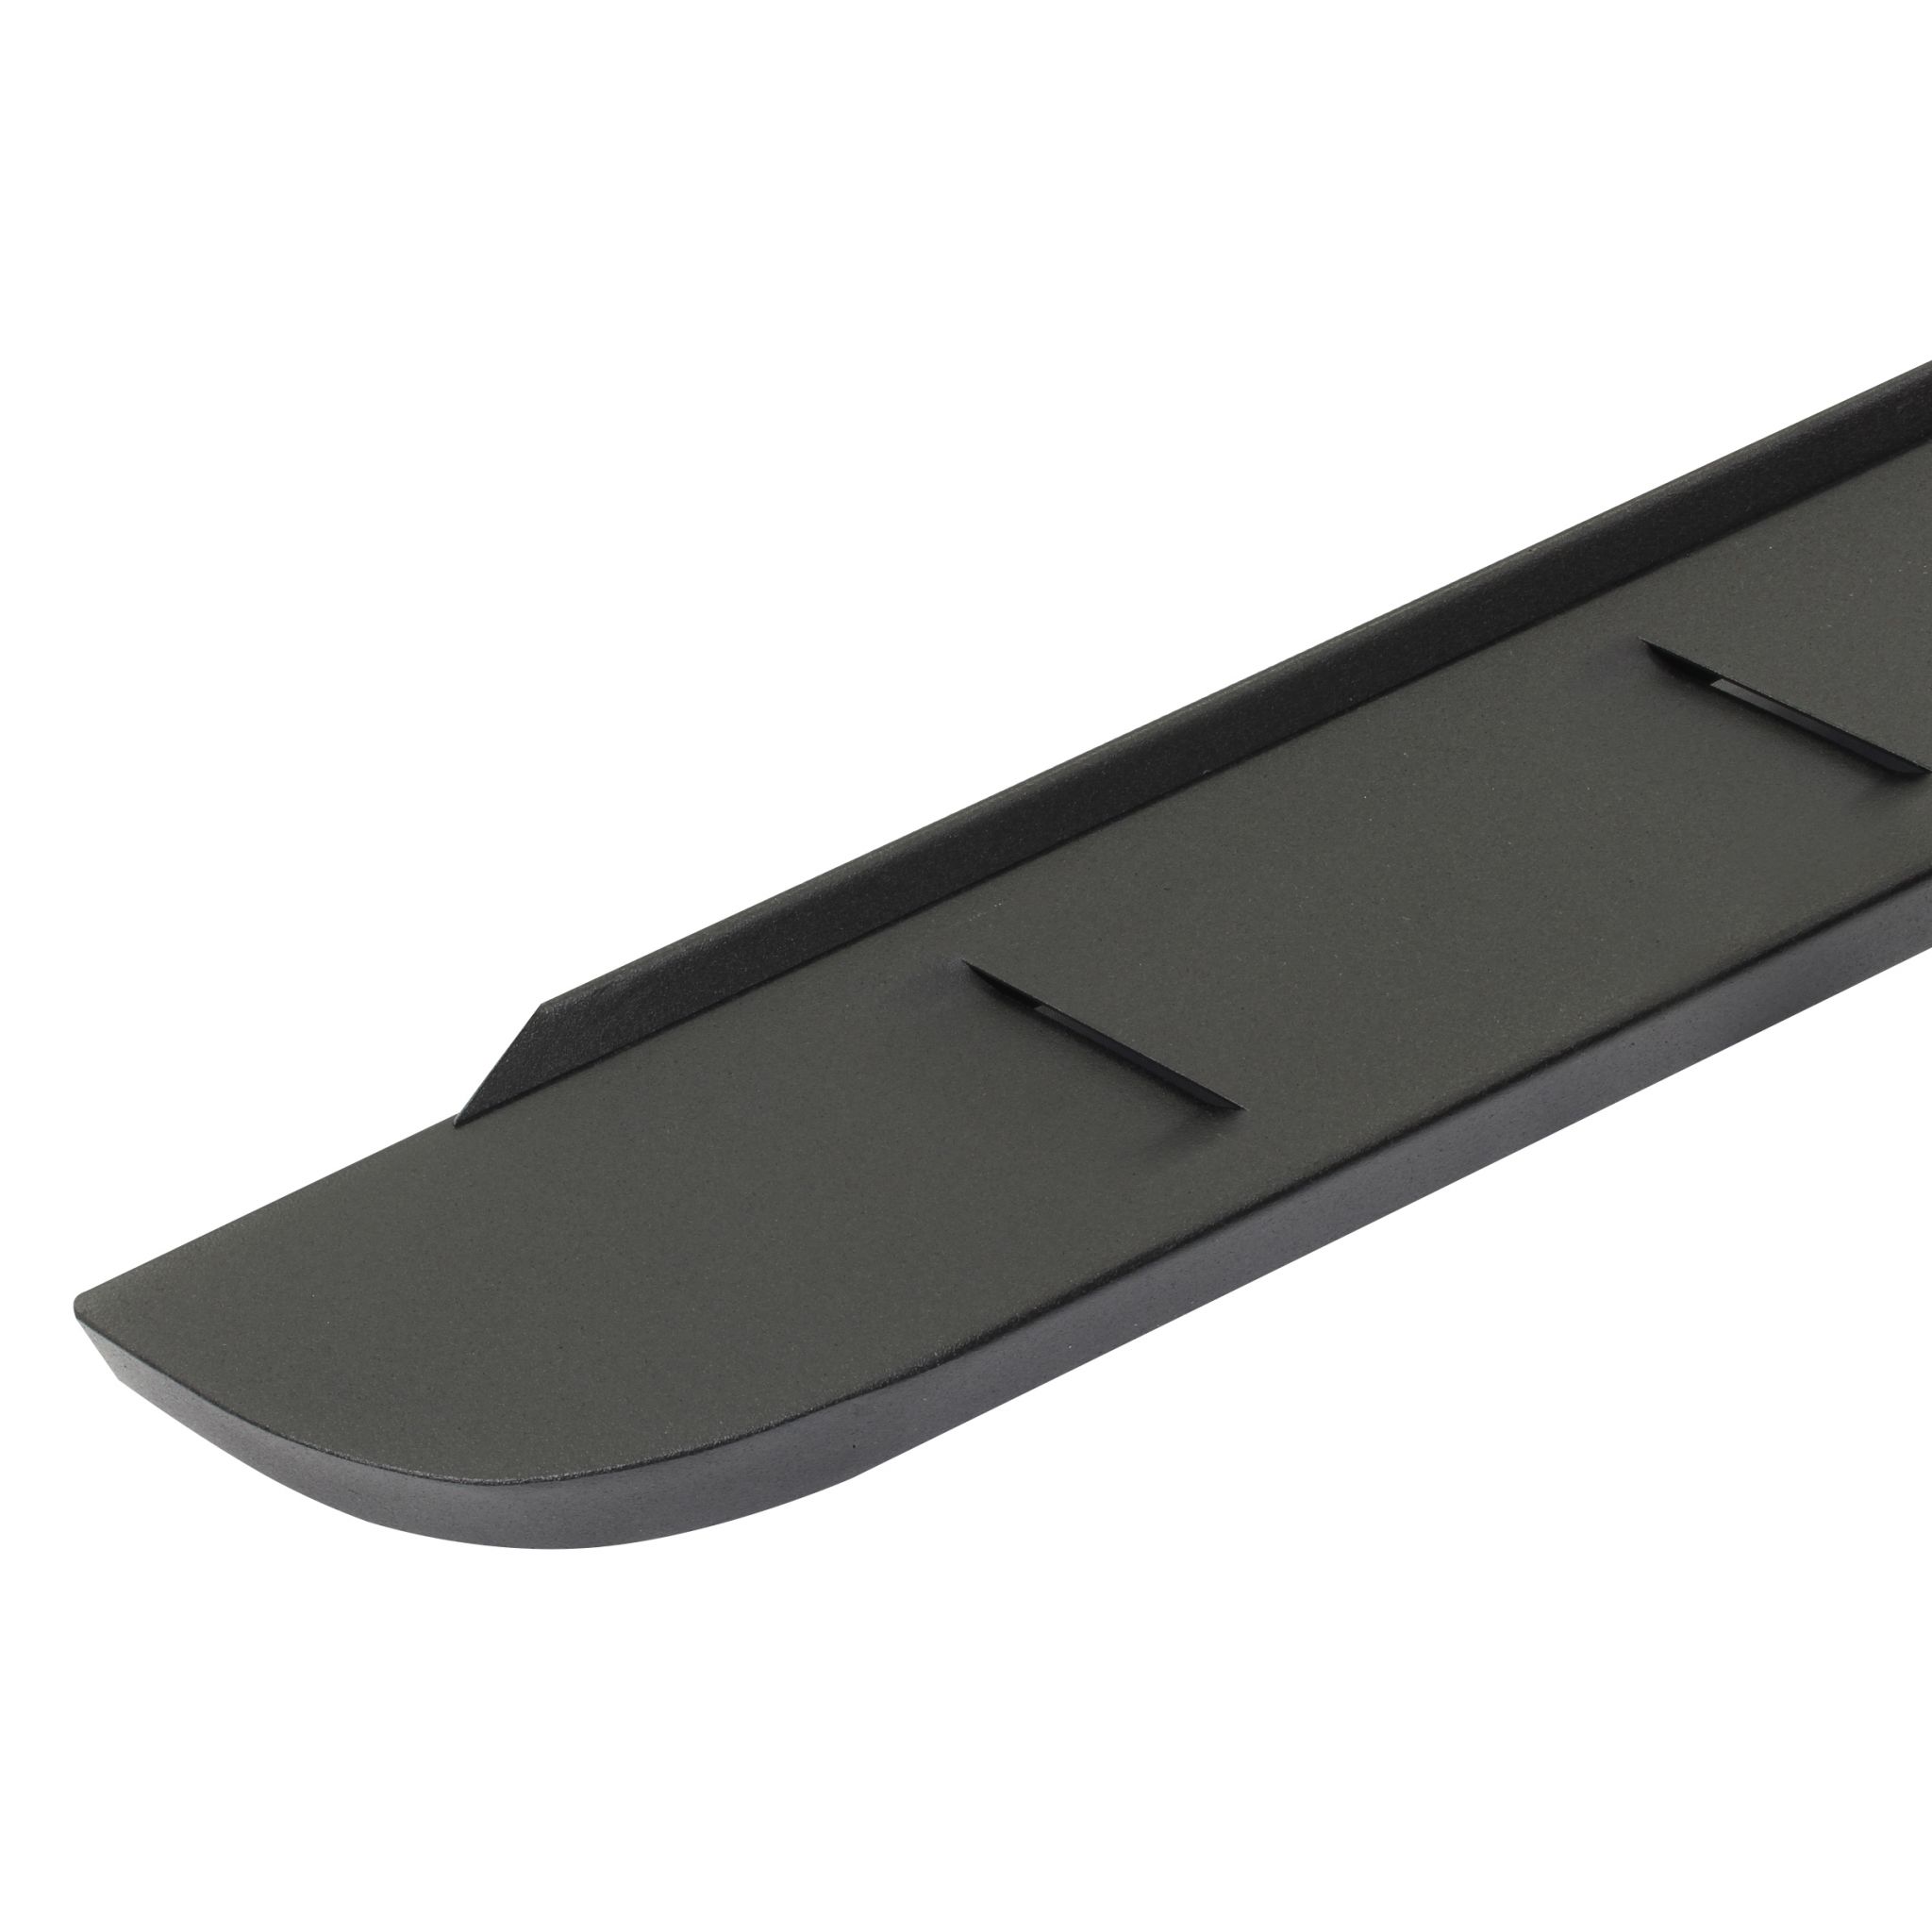 Go Rhino 63430687SPC - RB10 Slim Line Running Boards With Mounting Brackets - Textured Black